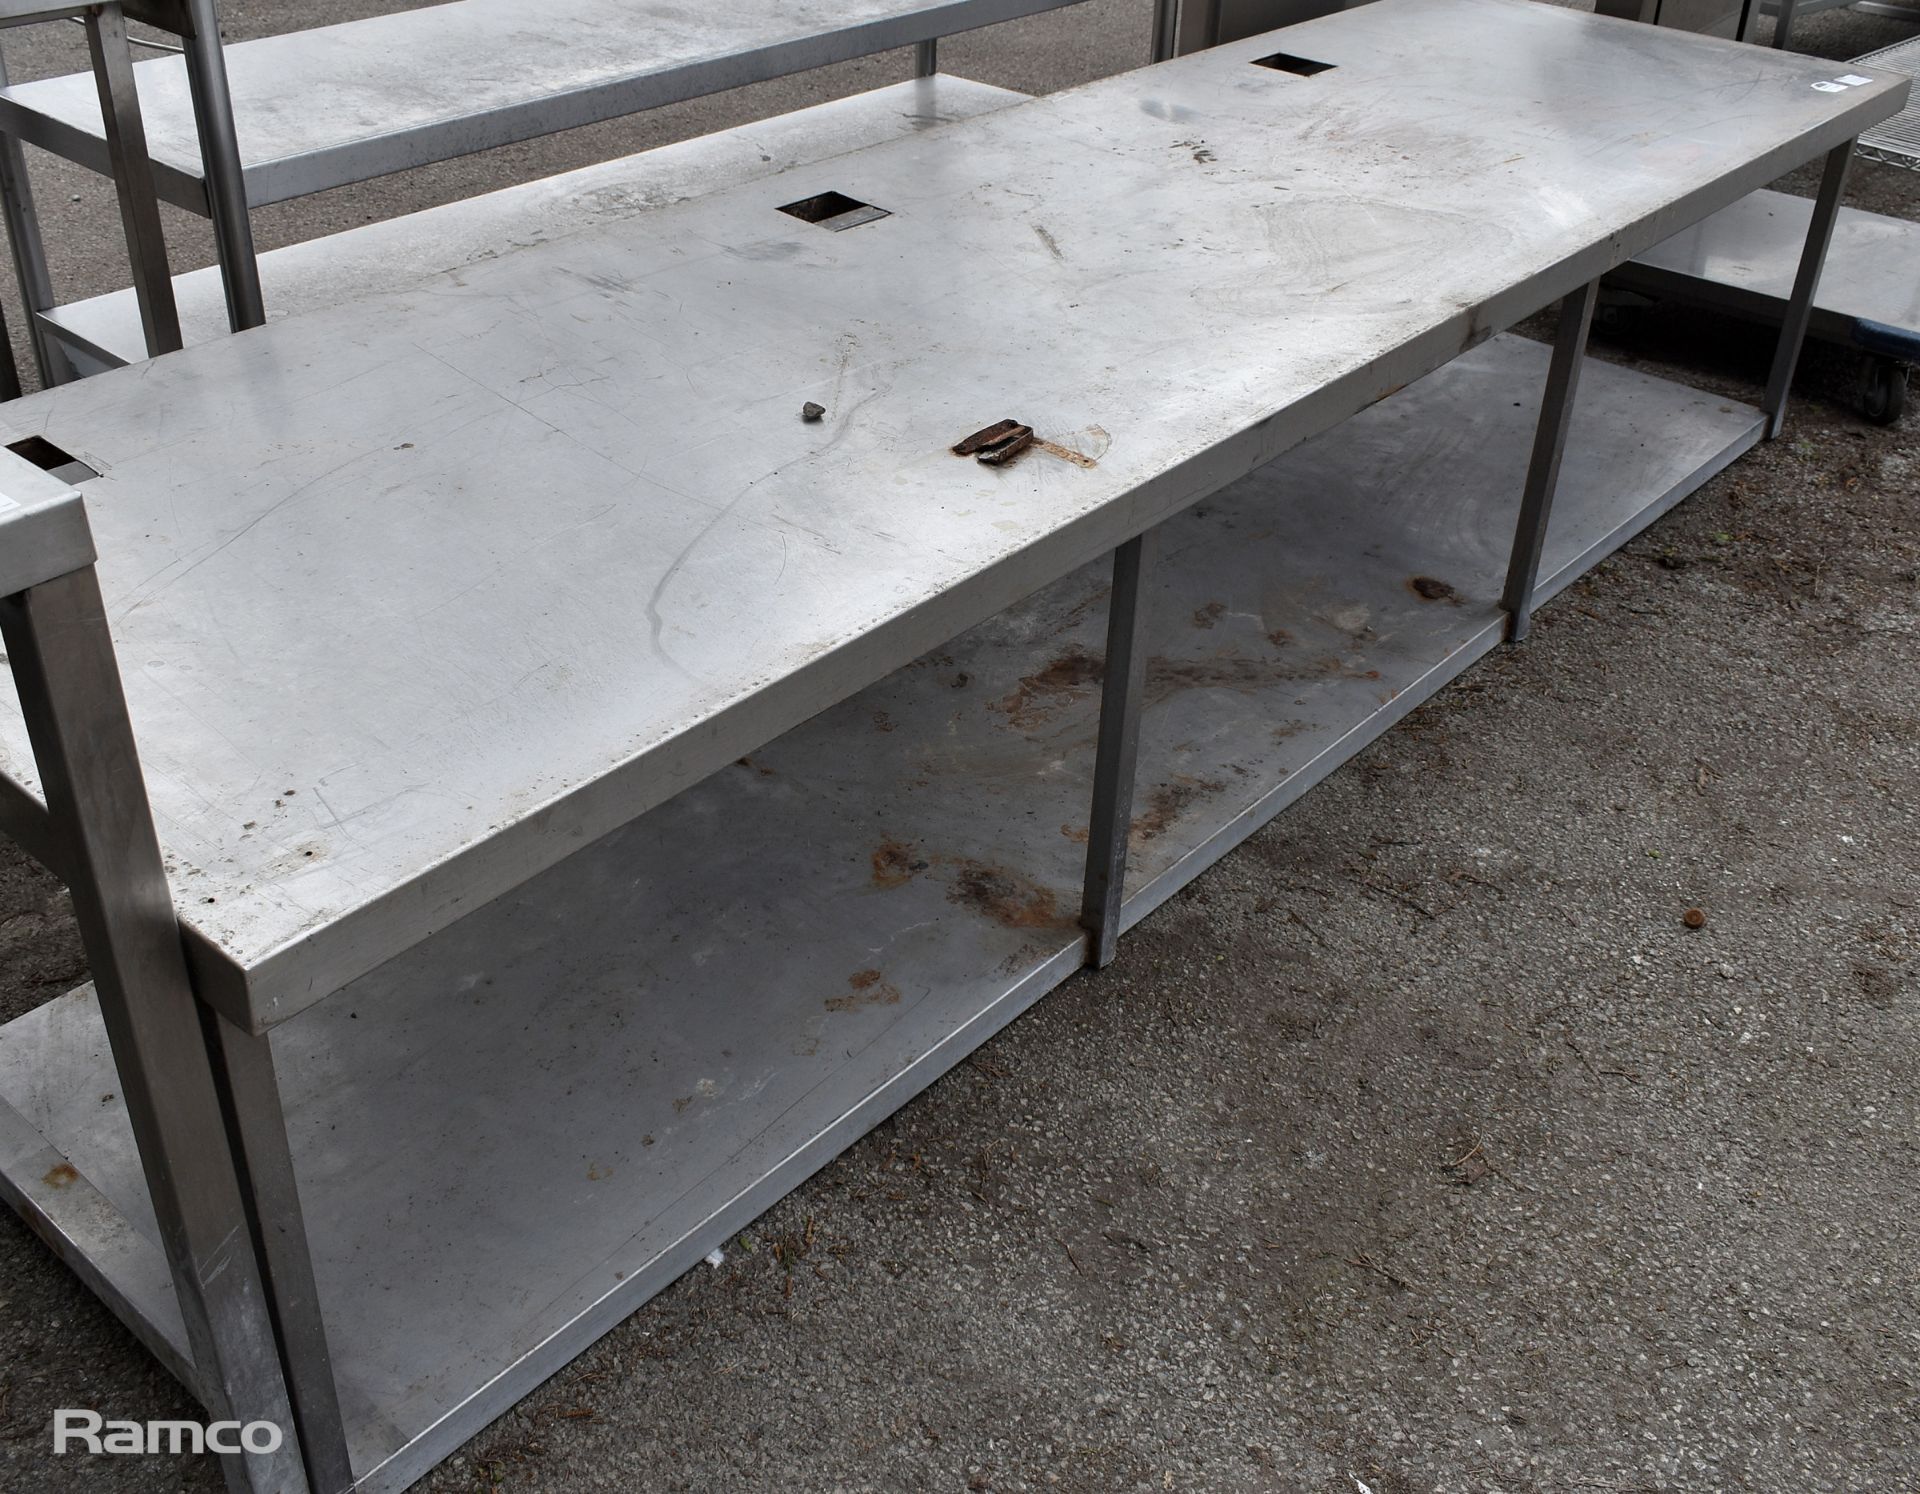 Stainless steel table - W 2850 x D 660 x H 620mm - Image 3 of 4